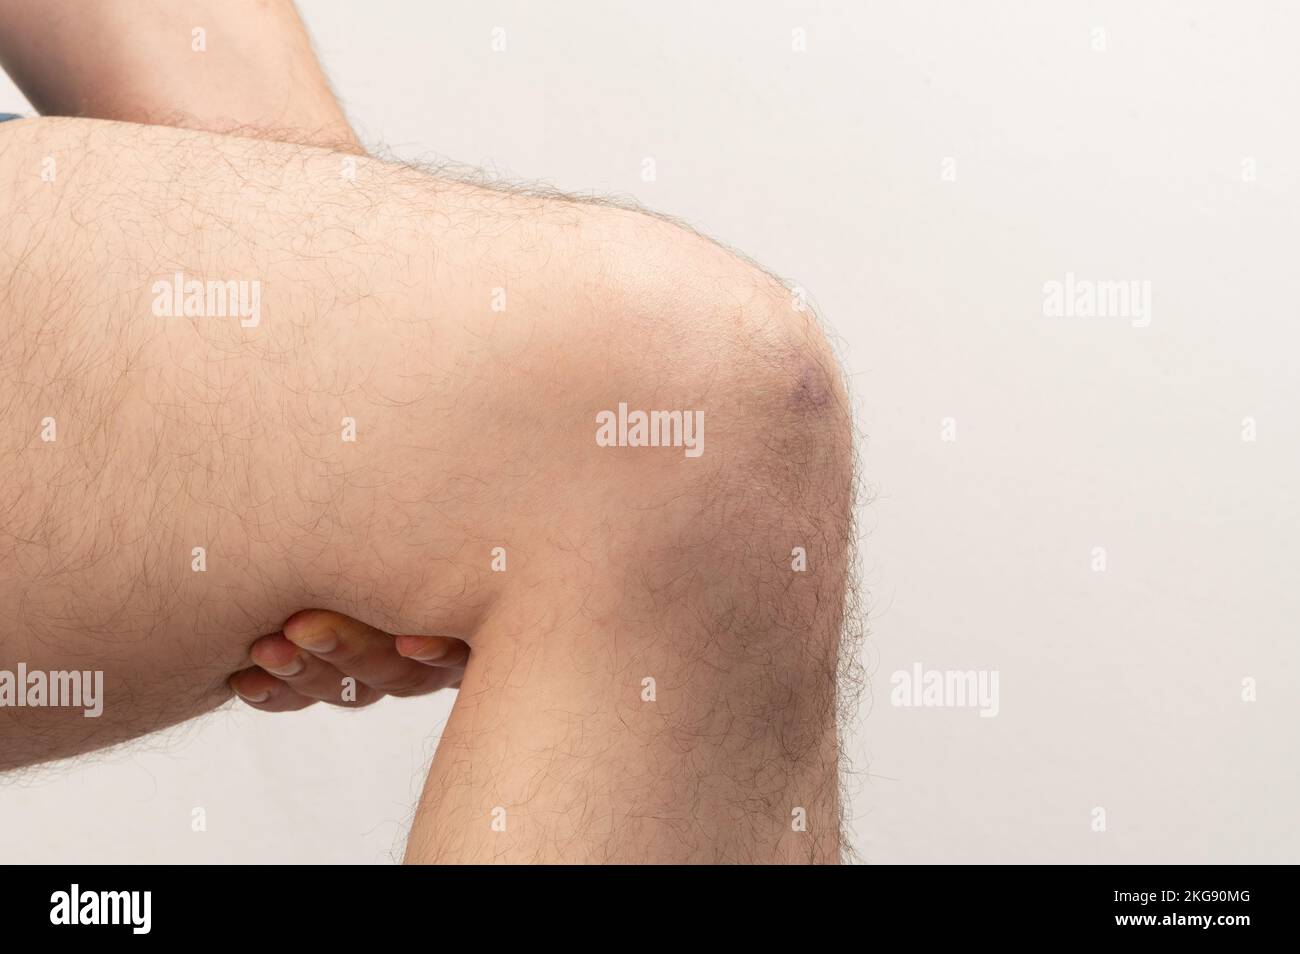 Knee therapy theme. Checking leg on wound isolated on studio background Stock Photo